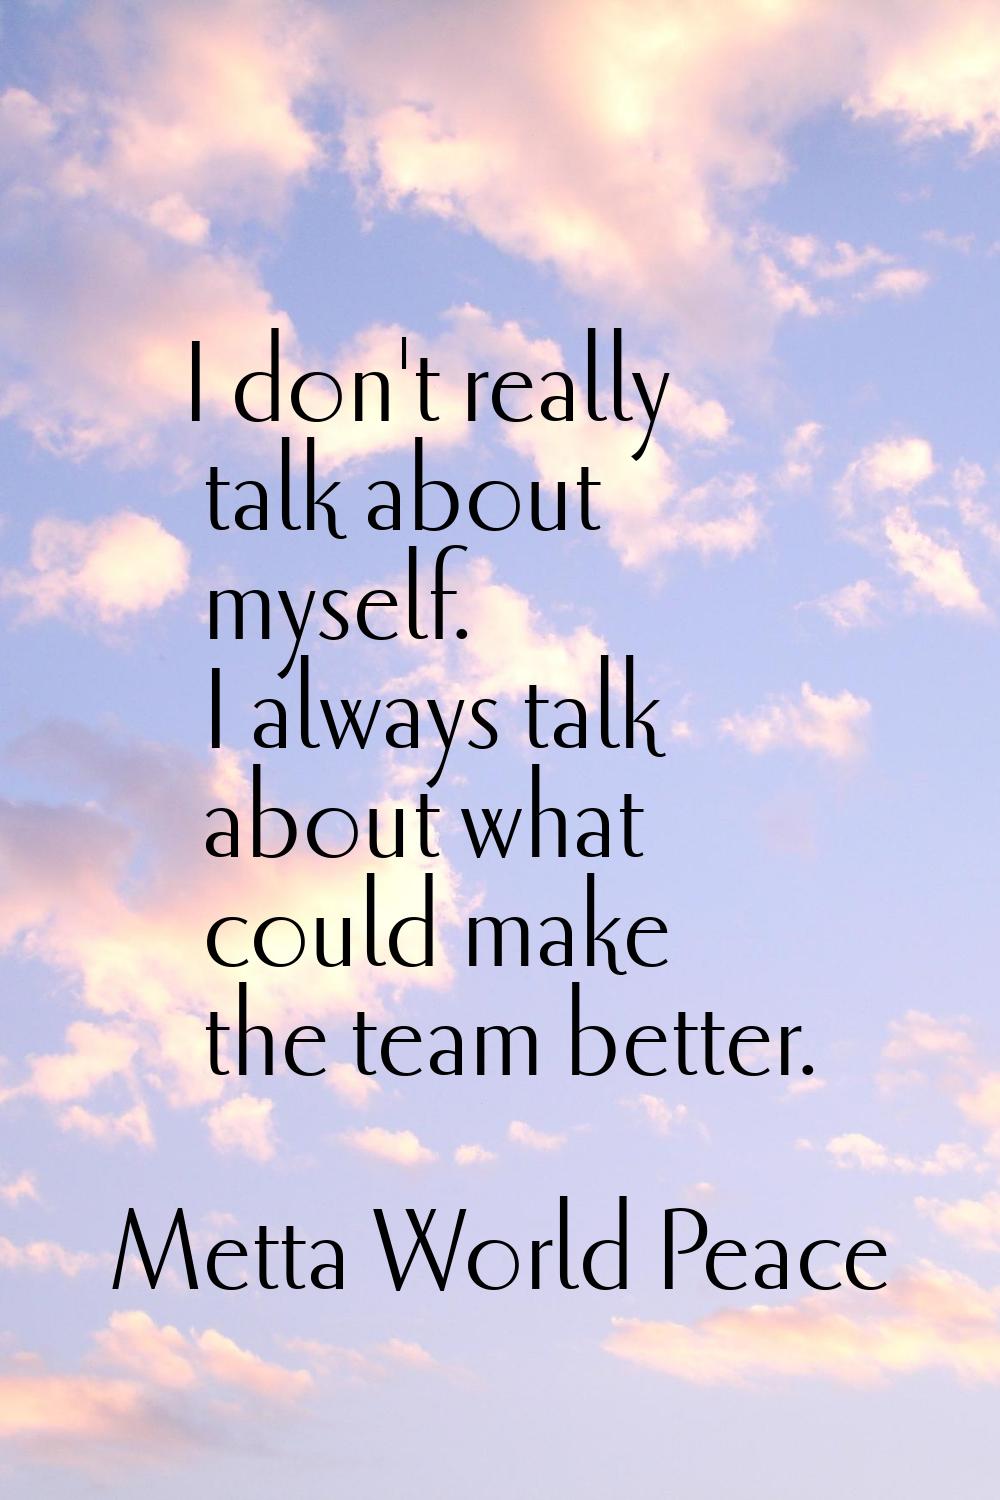 I don't really talk about myself. I always talk about what could make the team better.